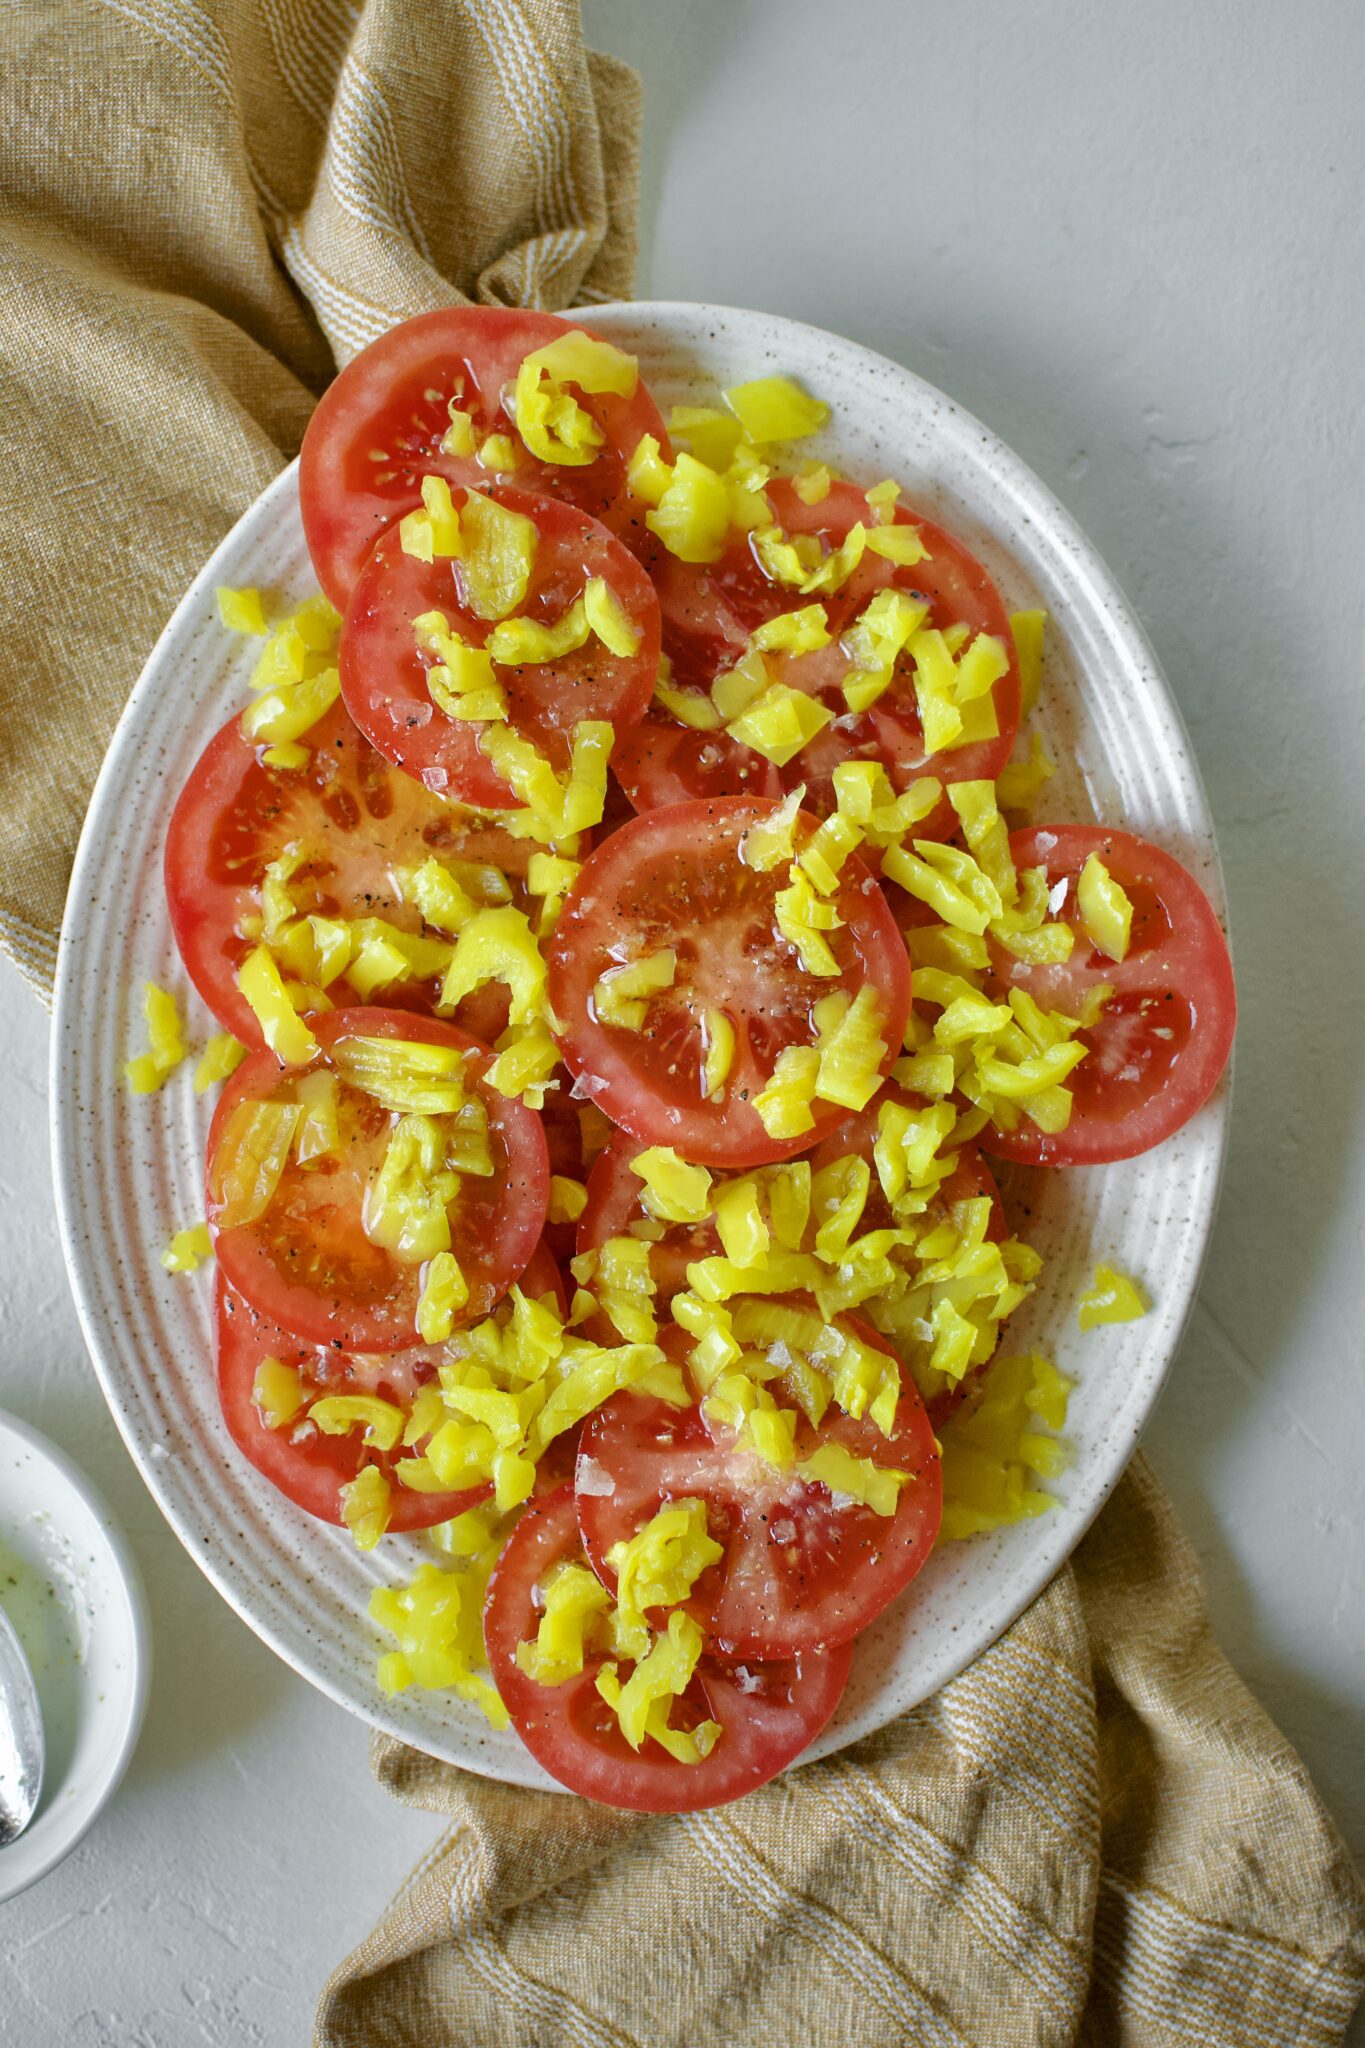 Tomato slices on a platter, topped with chopped banana pepper pieces and banana pepper vinaigrette.